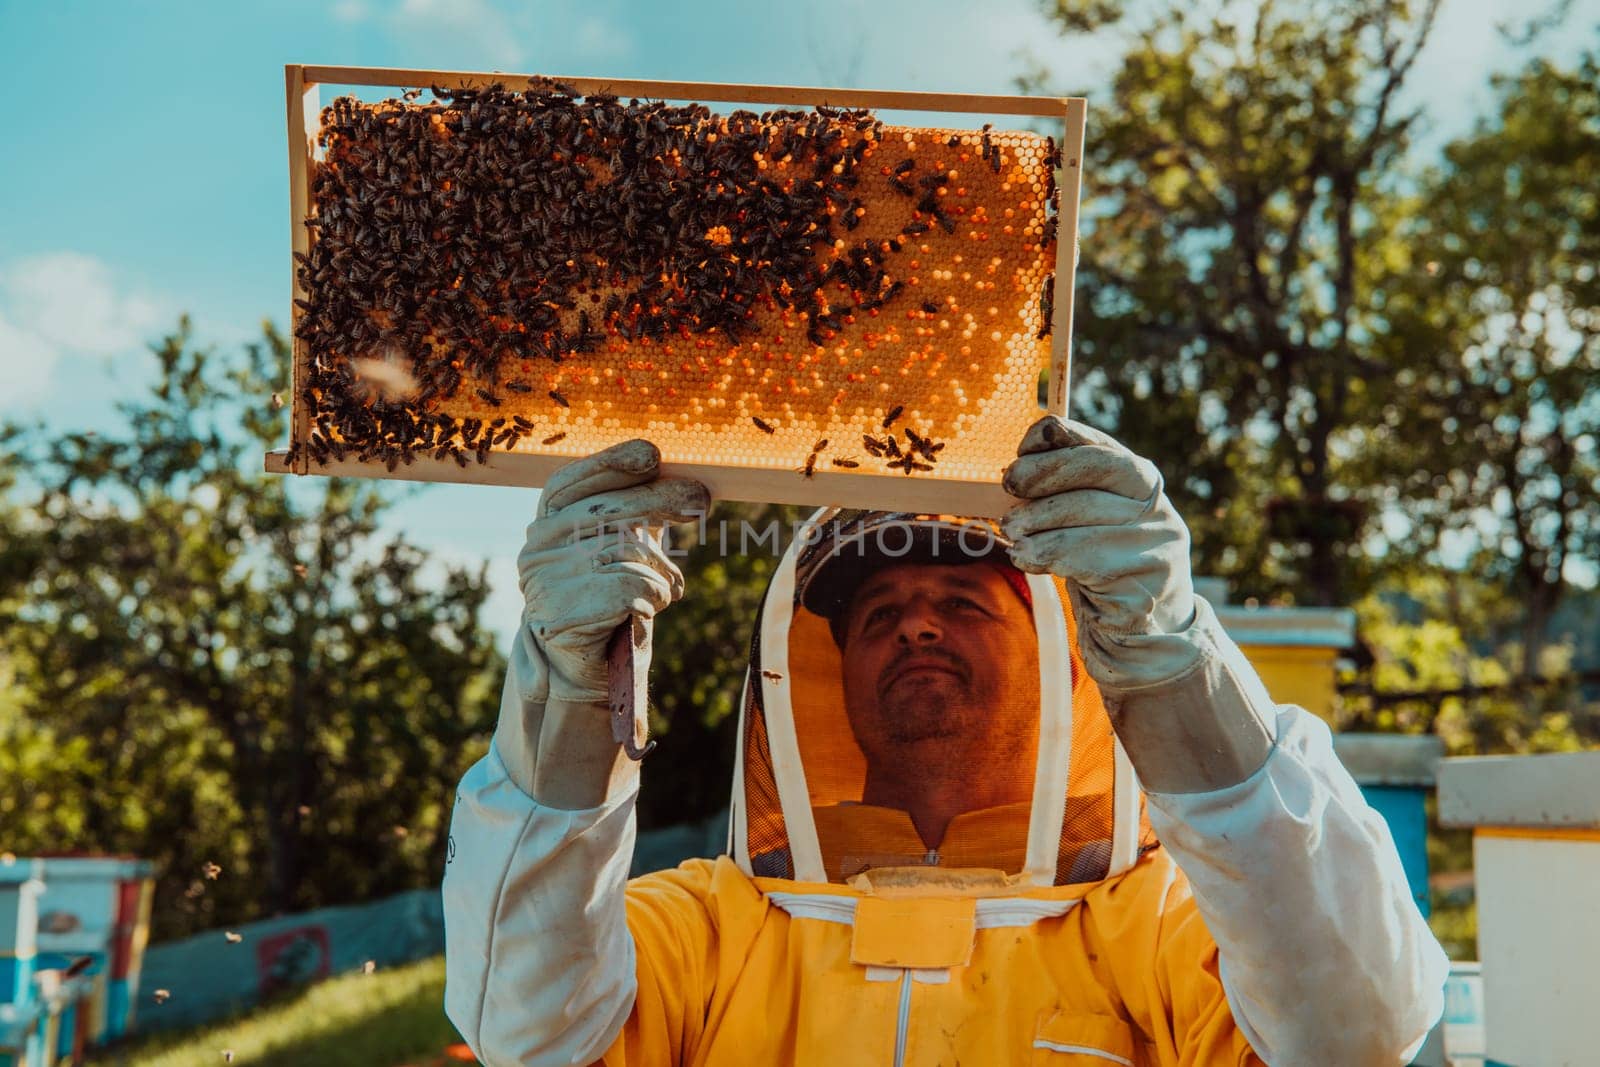 Beekeeper holding the beehive frame filled with honey against the sunlight in the field full of flowers.